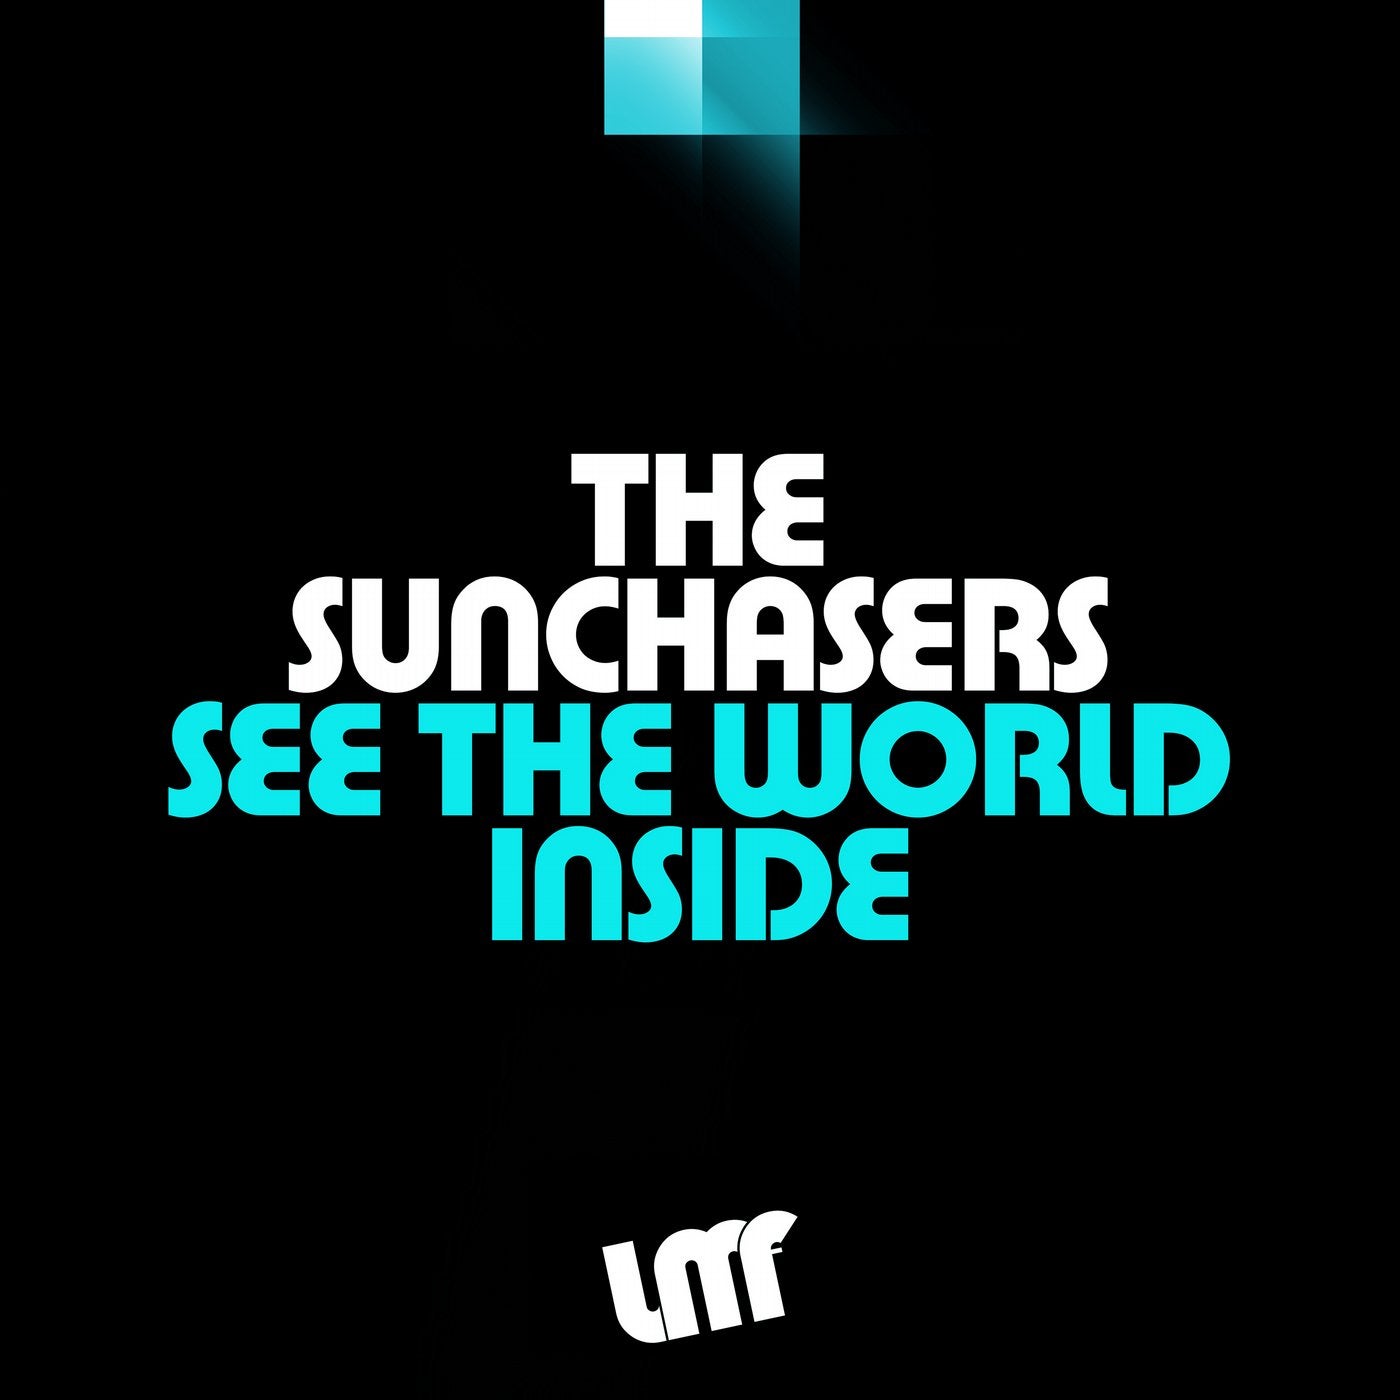 See the World Inside